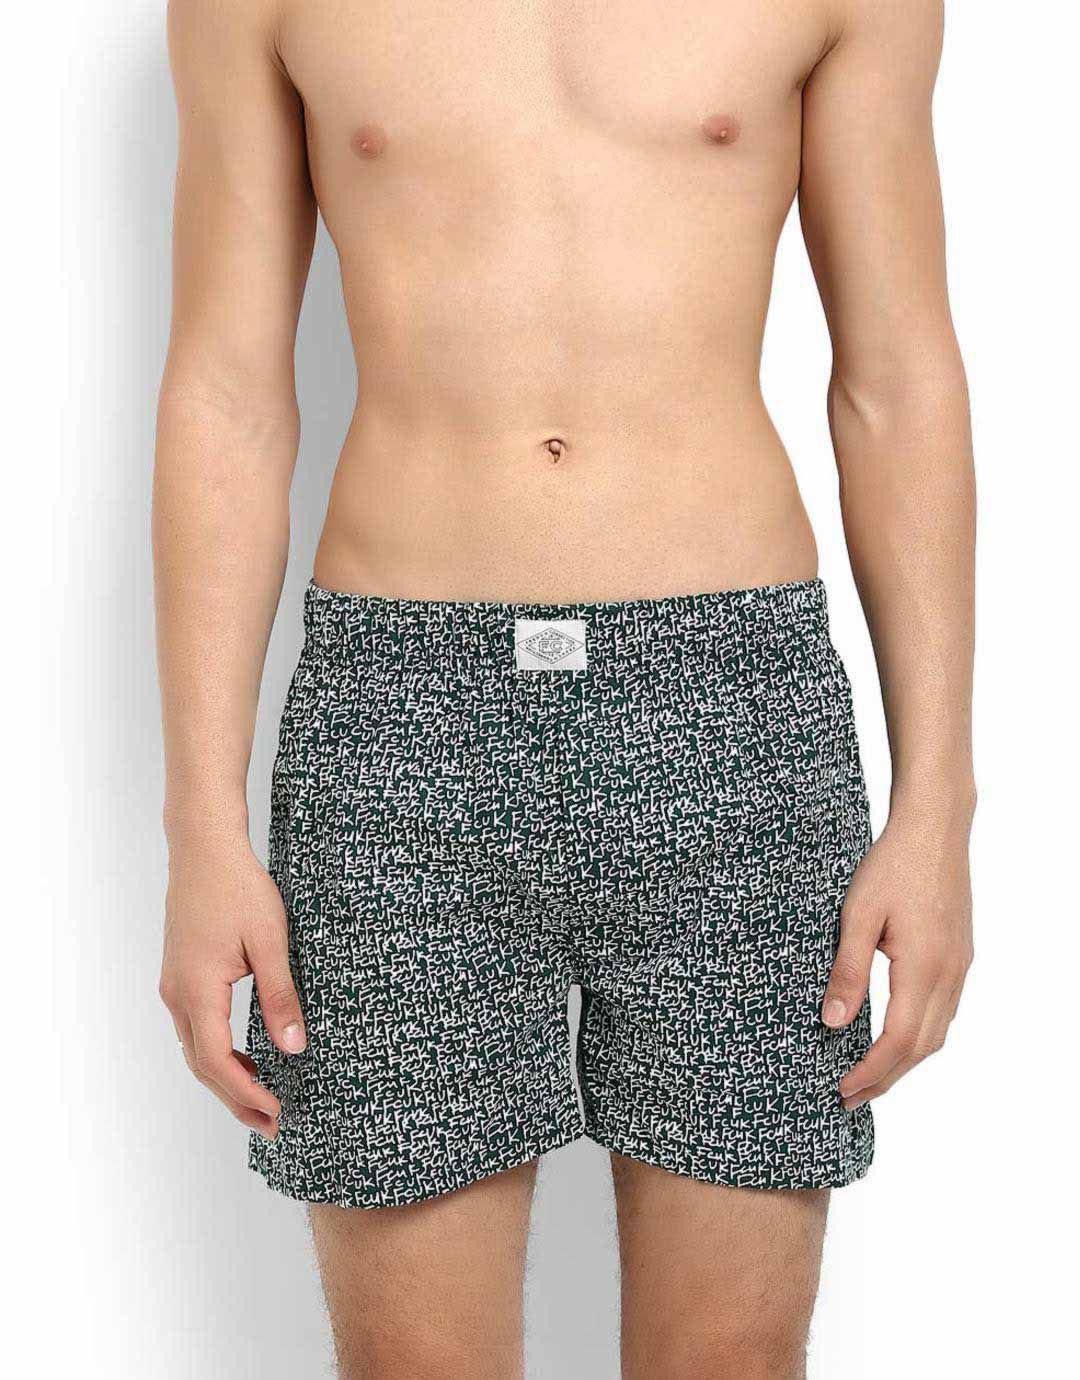 FCUK Green Boxers - Buy FCUK Green Boxers Online at Low Price in India ...